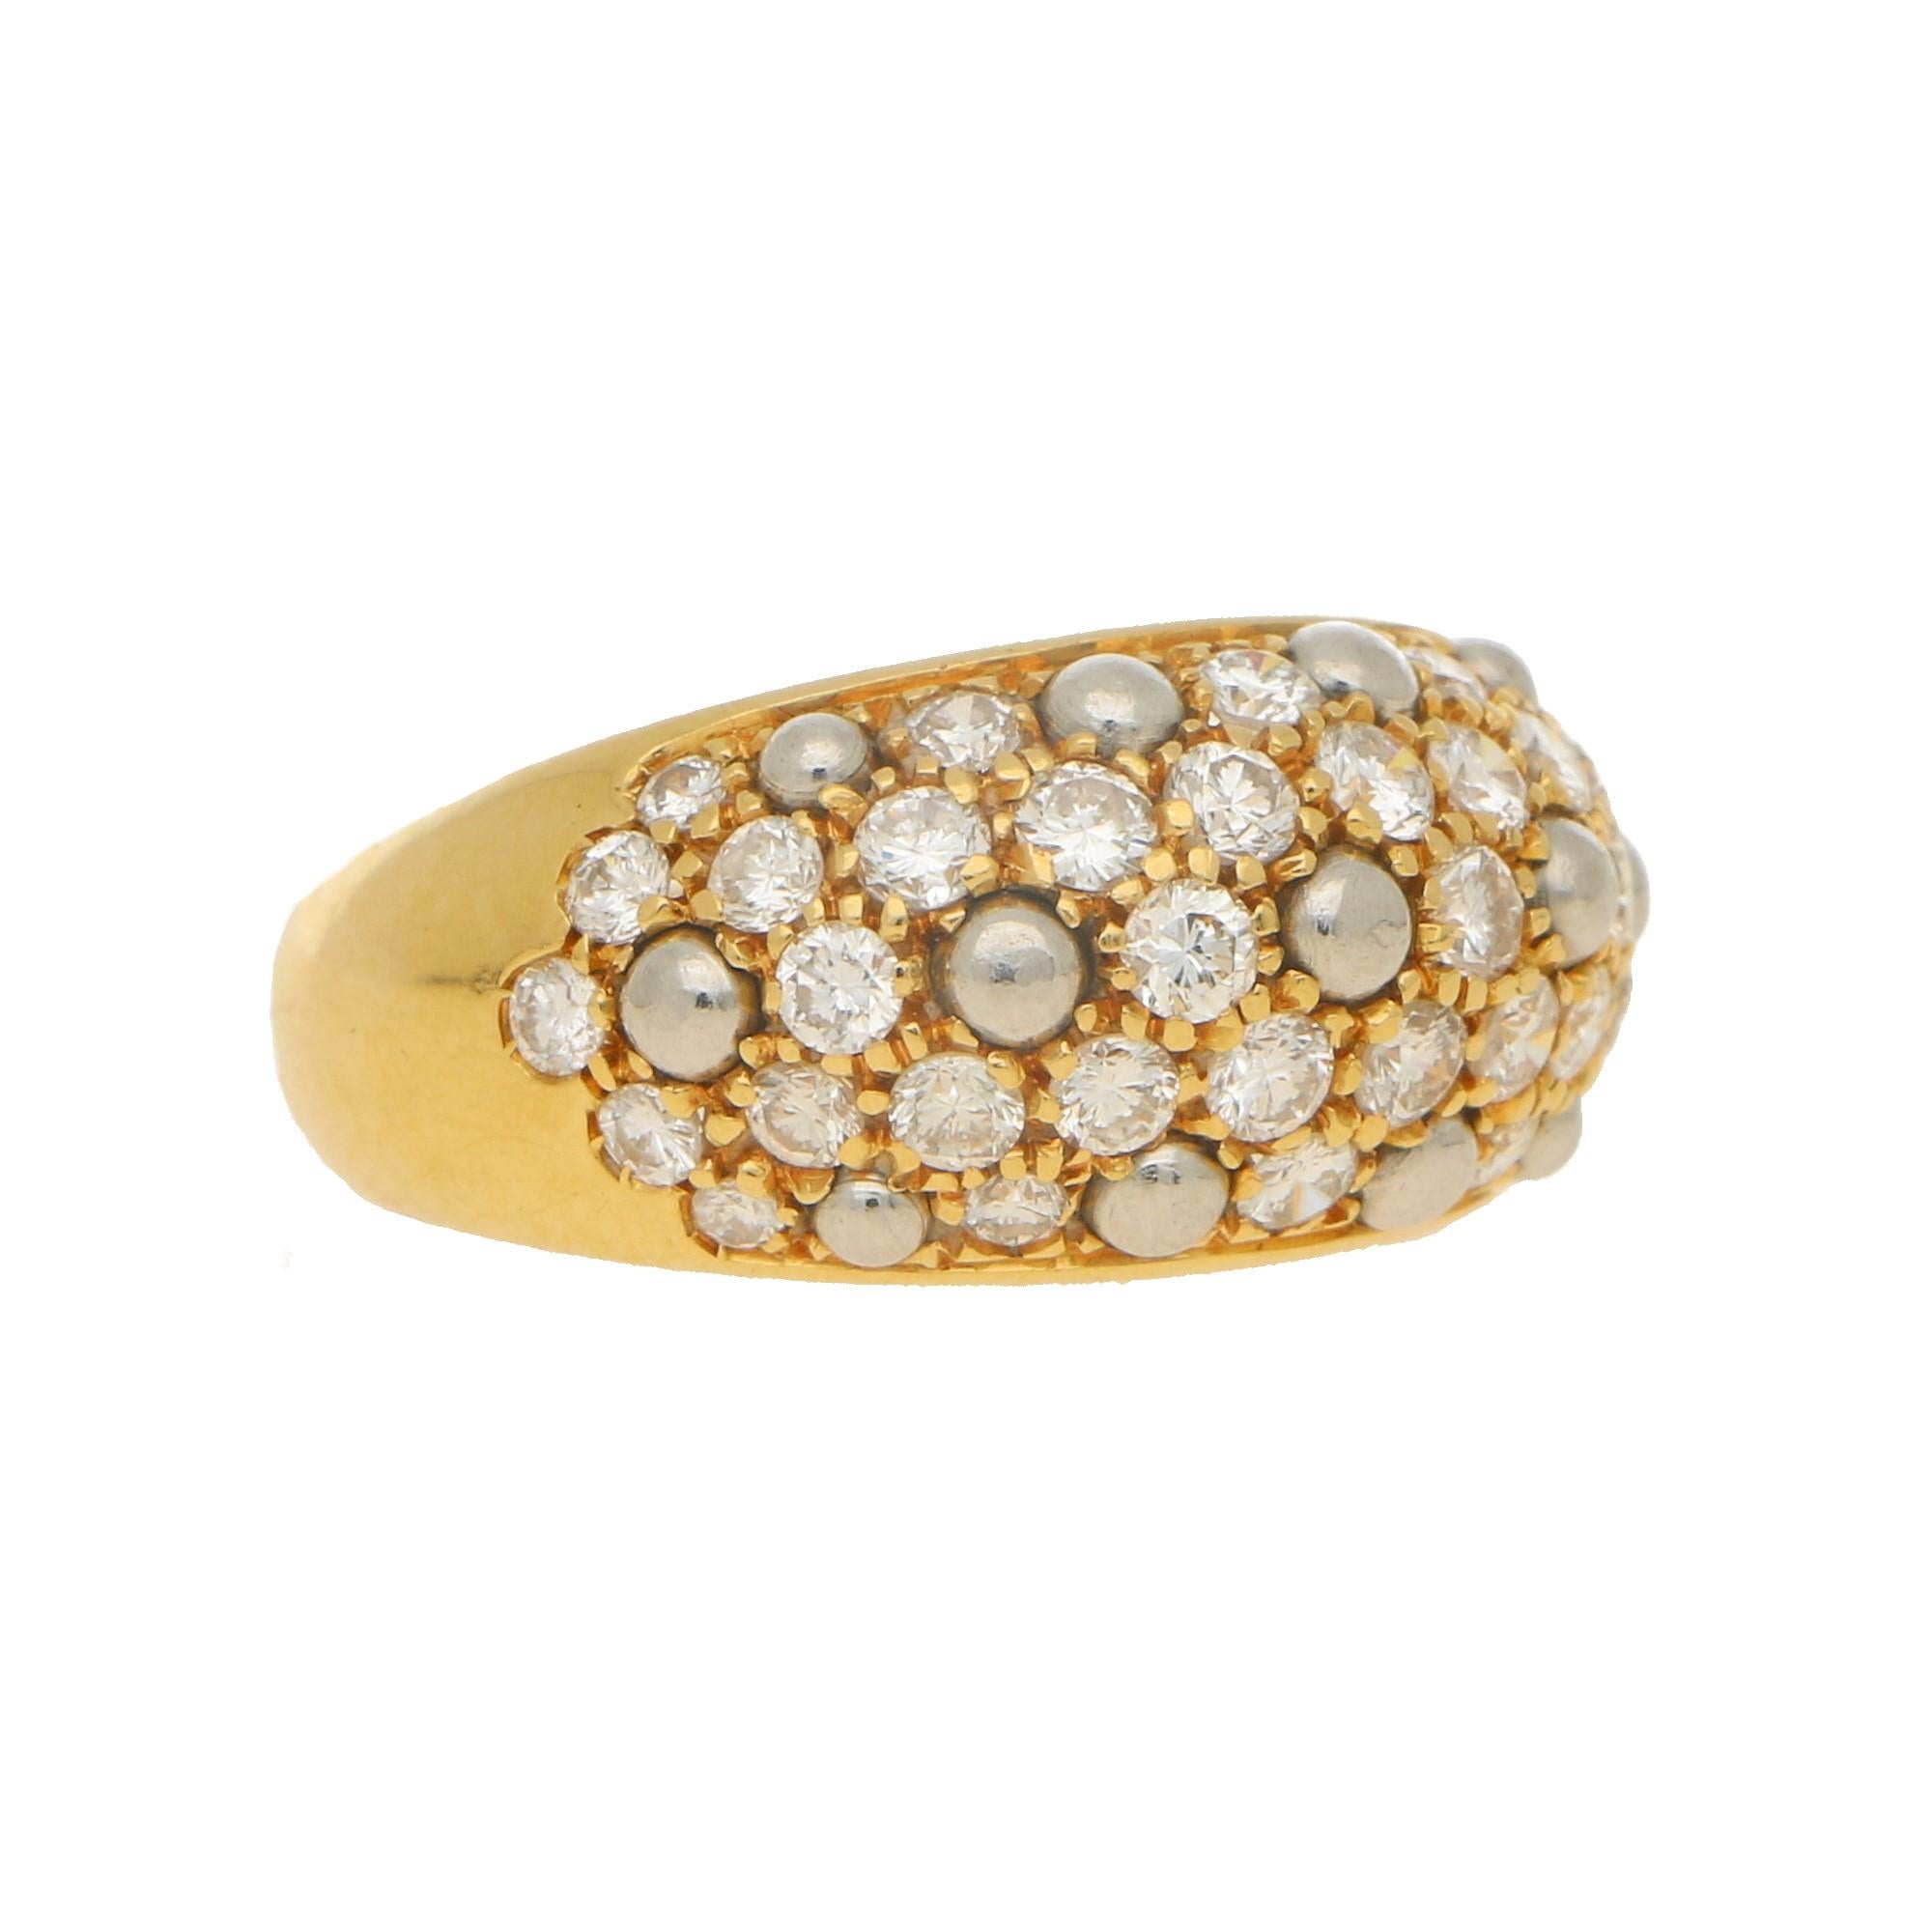 A stunning contemporary diamond bombe cocktail dress ring set in 18k yellow and platinum, signed Cartier. The piece is beautifully interspersed with small platinum beads, these break up the diamonds that are pavé set within the ring and add to the